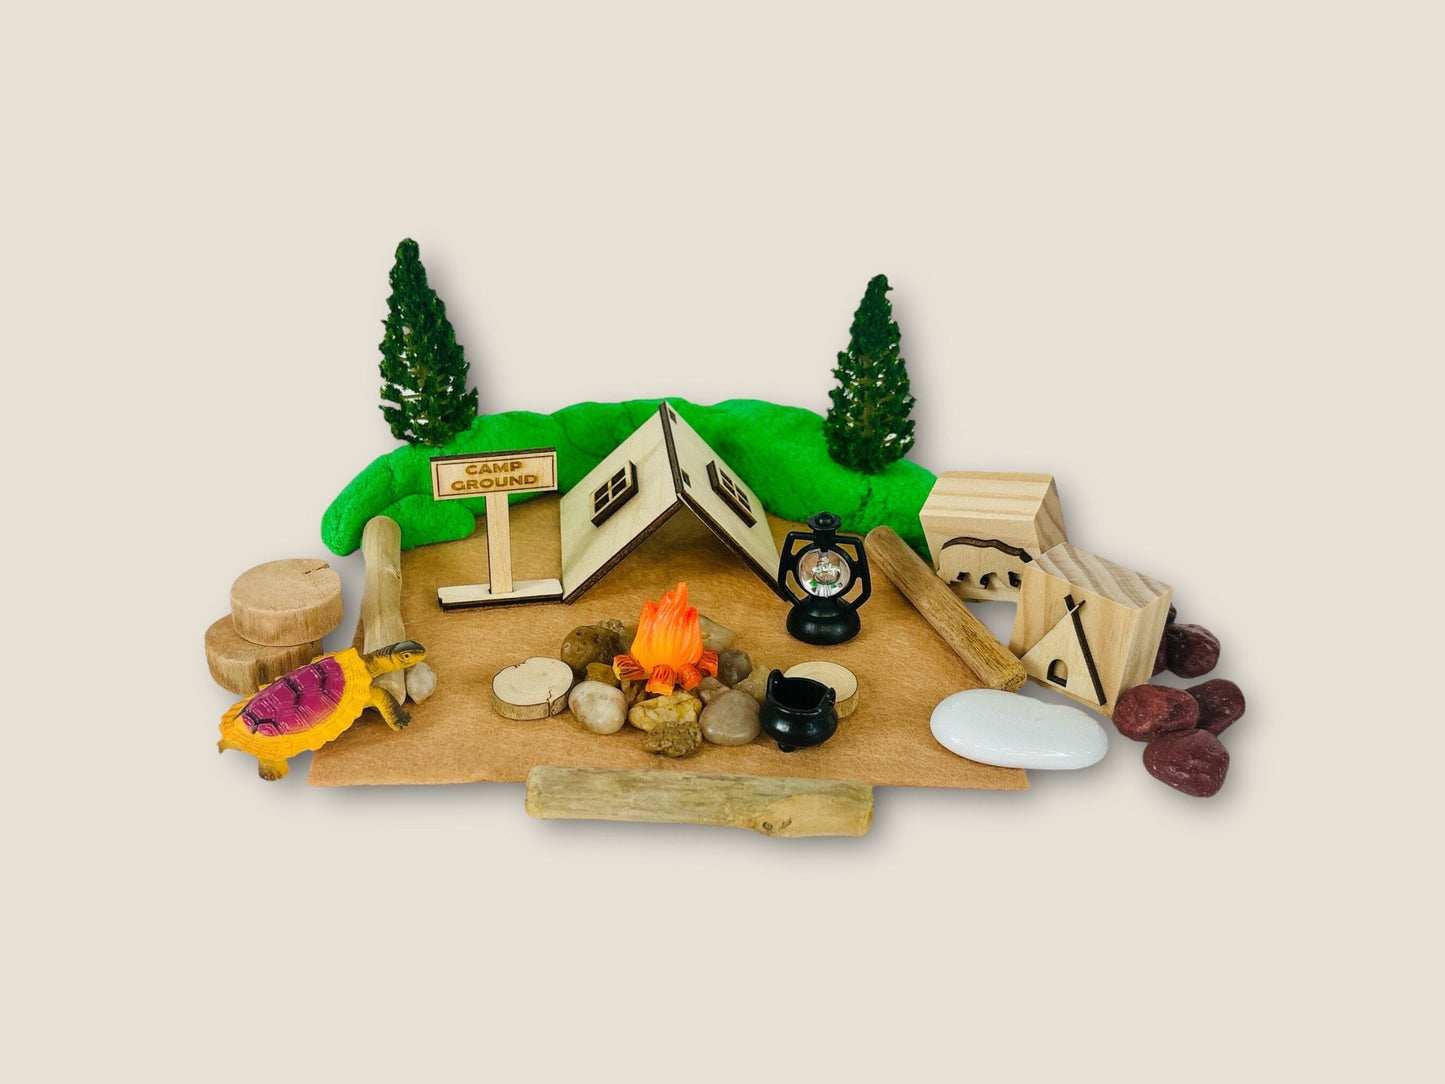 Camping Sensory Bin, Play Dough Camping Kit, Camping Busy Box, Adventure Activity Bin for Children, Birthday Gifts, Kinetic Sand kit